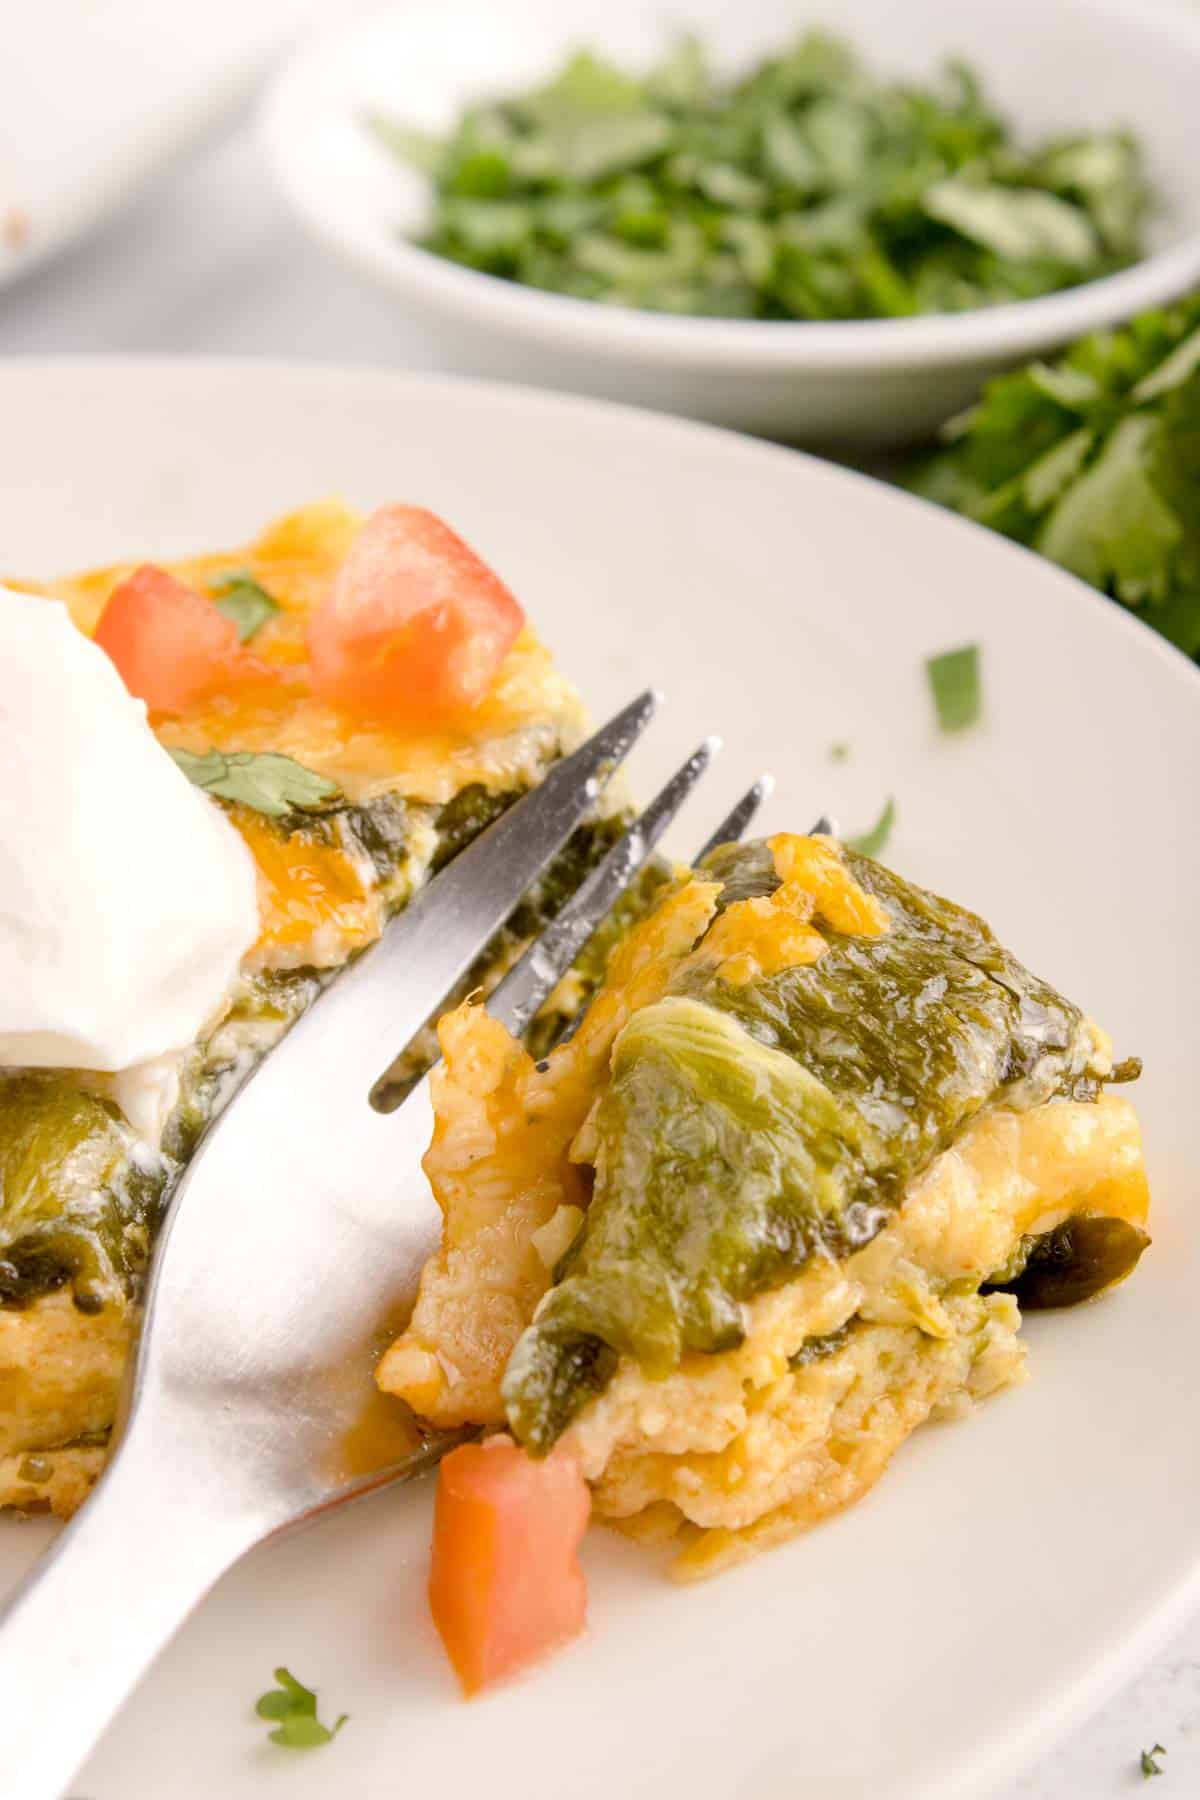 Chile Relleno Casserole is a delicious and comforting Mexican-inspired dish that captures the flavors of traditional chiles rellenos in an easy-to-make casserole form.